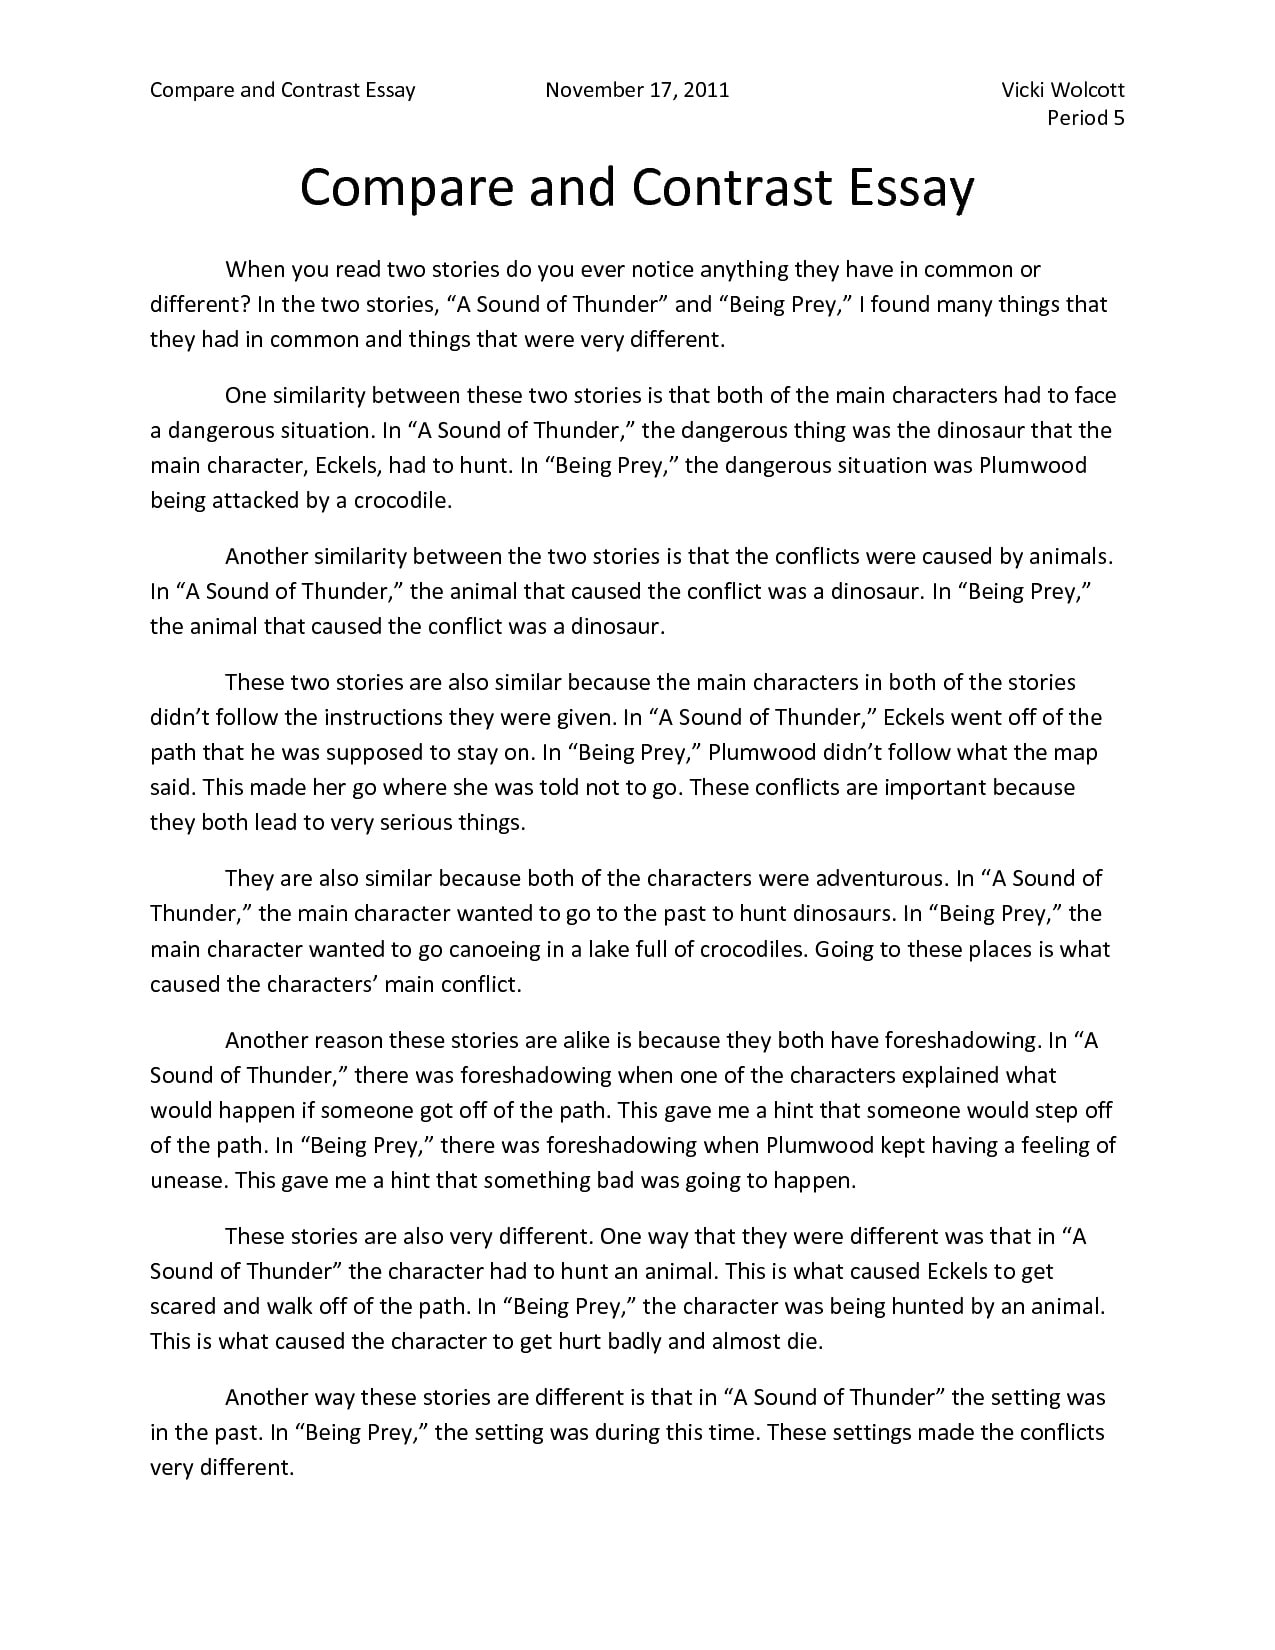 Examples of college compare and contrast essays